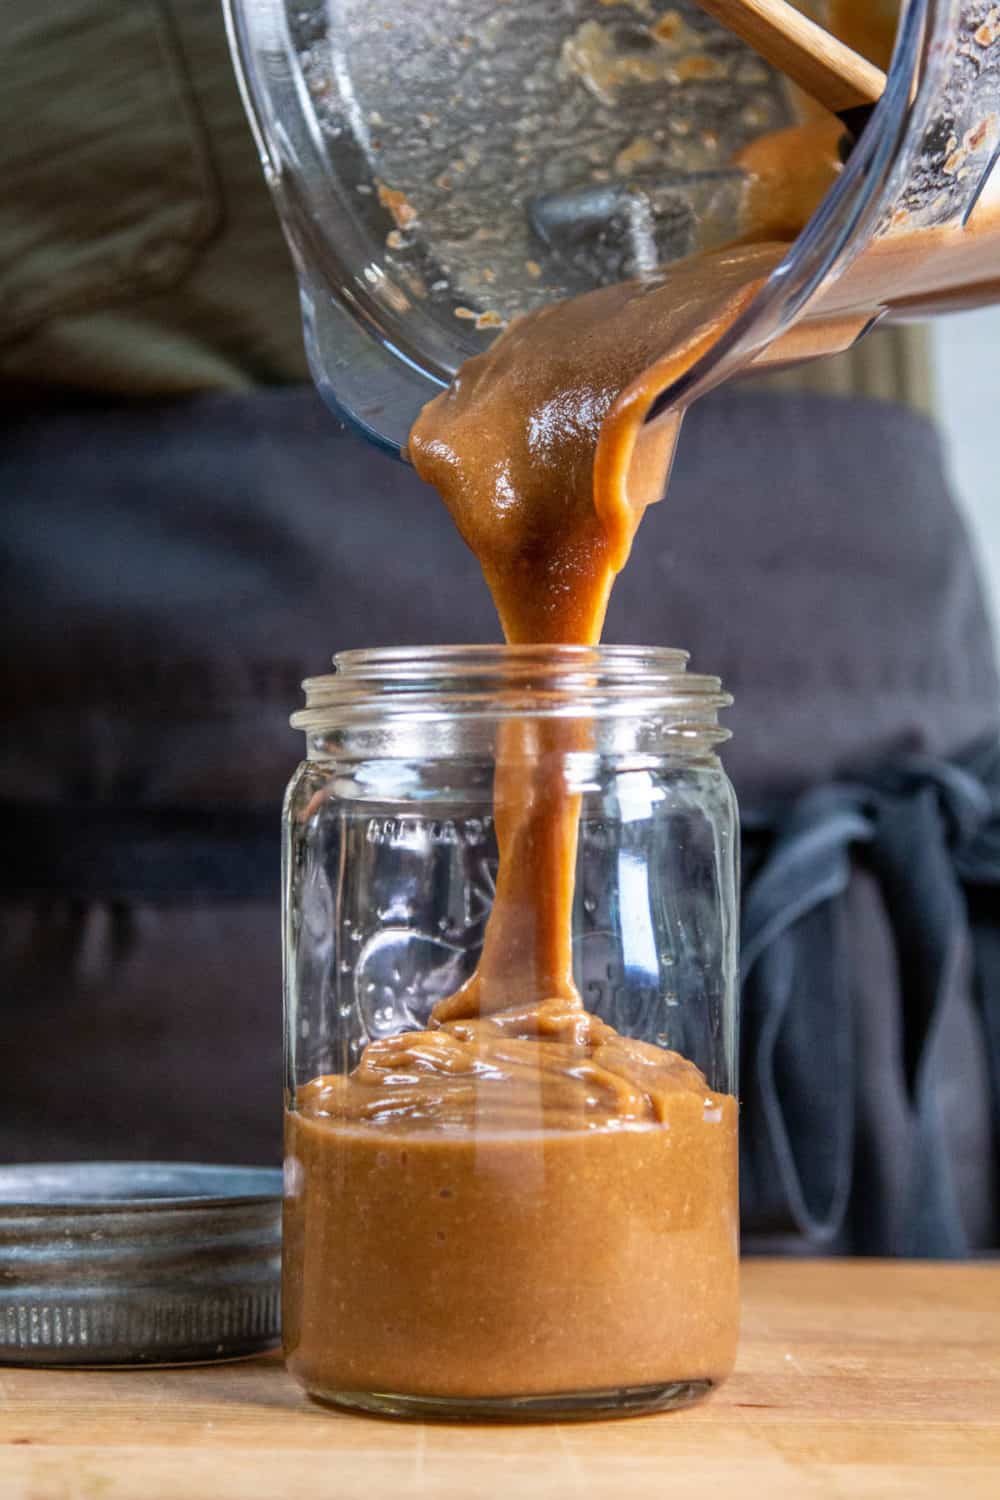 Date caramel being poured into a jar.